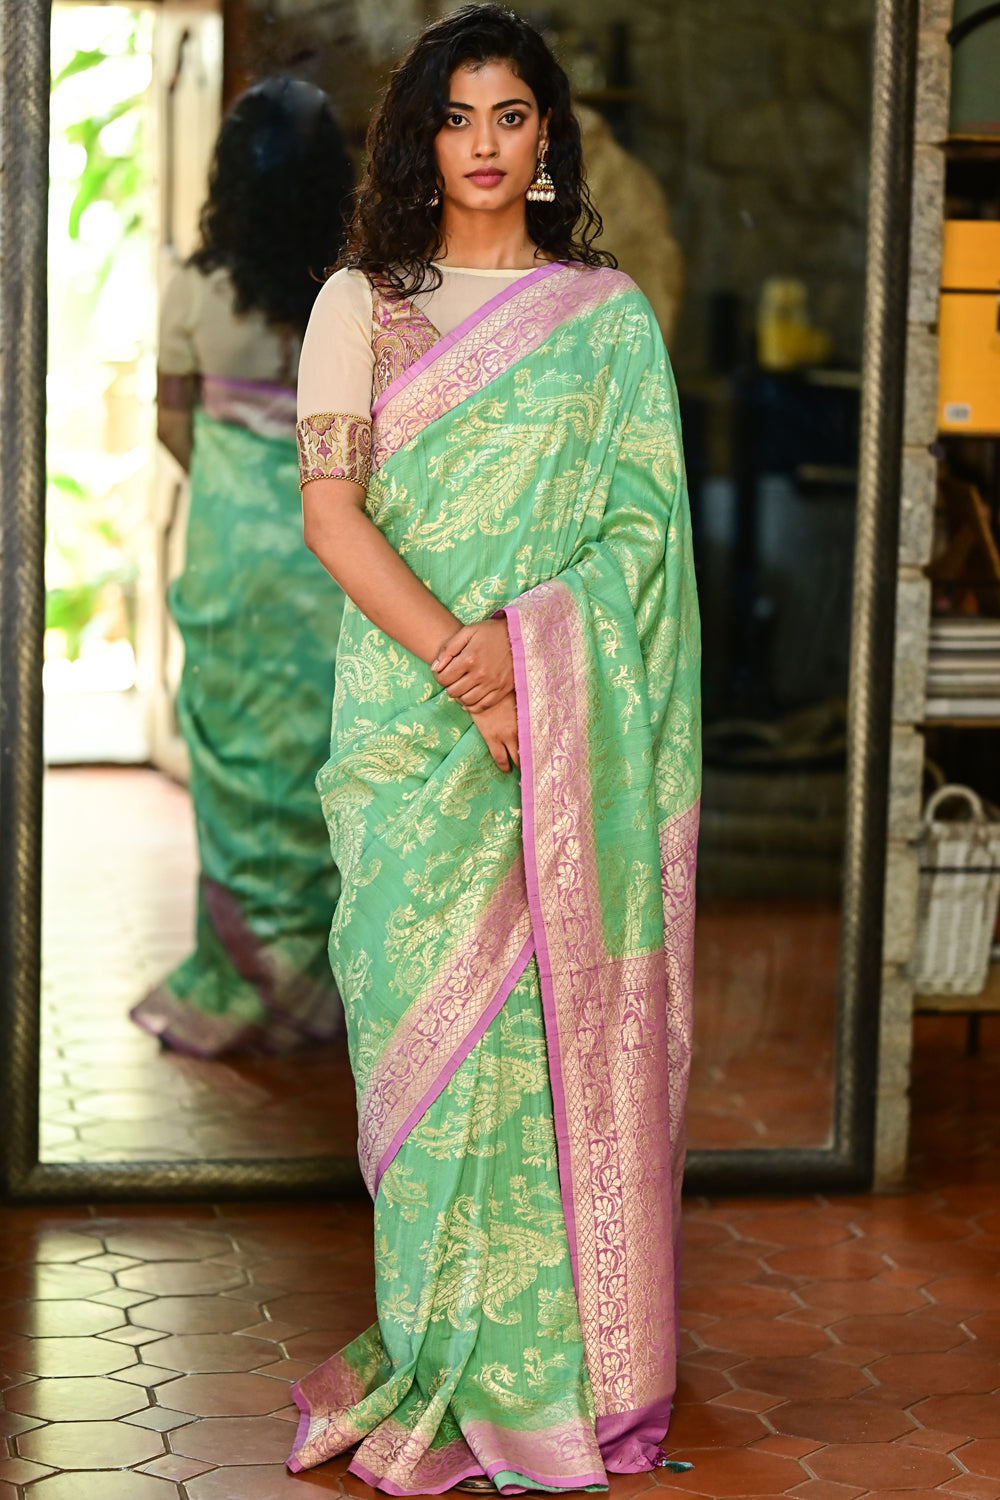 Exquisite Tussar Georgette Silk Saree in Aqua and Lavender with Silver Paisley Jaal | SILK MARK CERTIFIED: PRE-ORDER